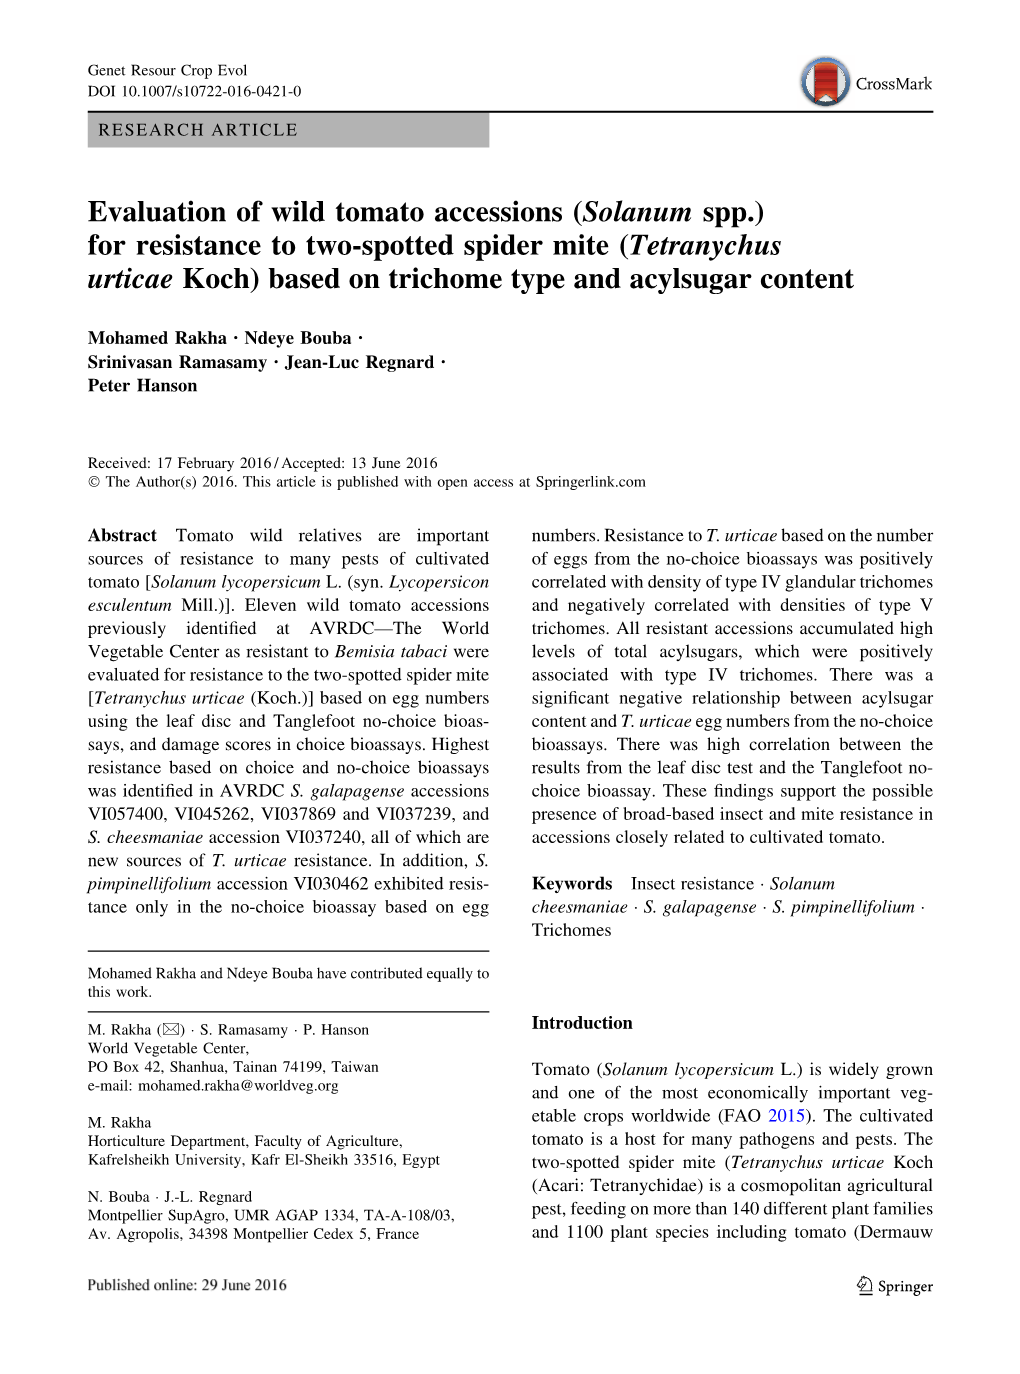 Evaluation of Wild Tomato Accessions (Solanum Spp.) for Resistance to Two-Spotted Spider Mite (Tetranychus Urticae Koch) Based on Trichome Type and Acylsugar Content